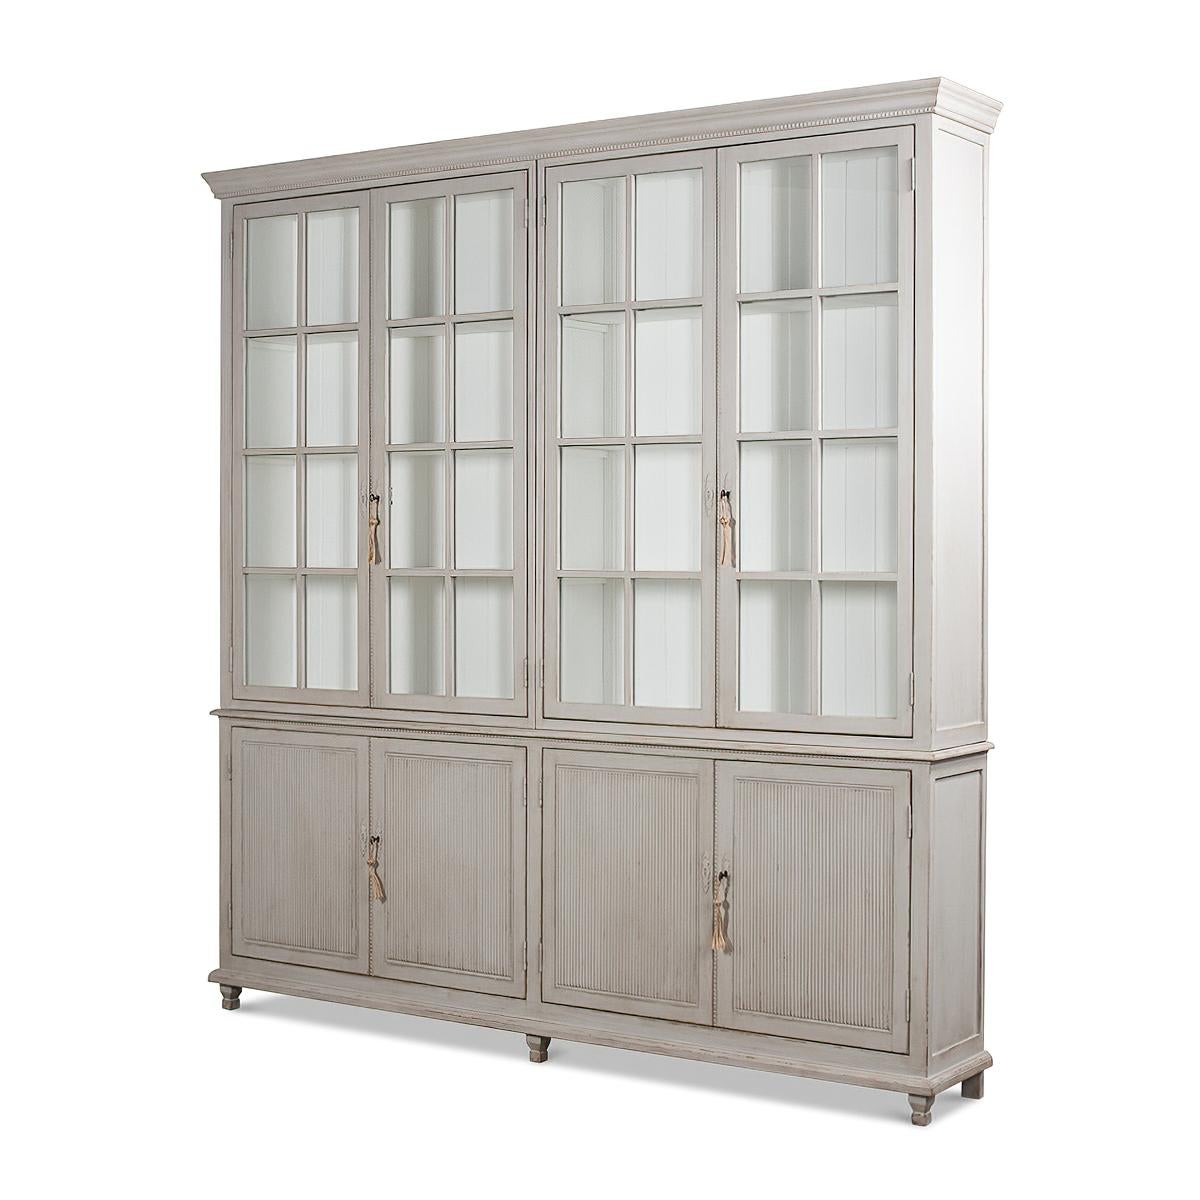 A Transitional Rustic grey painted bookcase with a distressed finish. The upper section with four glass door display sections and a molded cornice. The lower section with reeded panel doors. With decorative antique-style locks.

Dimensions: 97